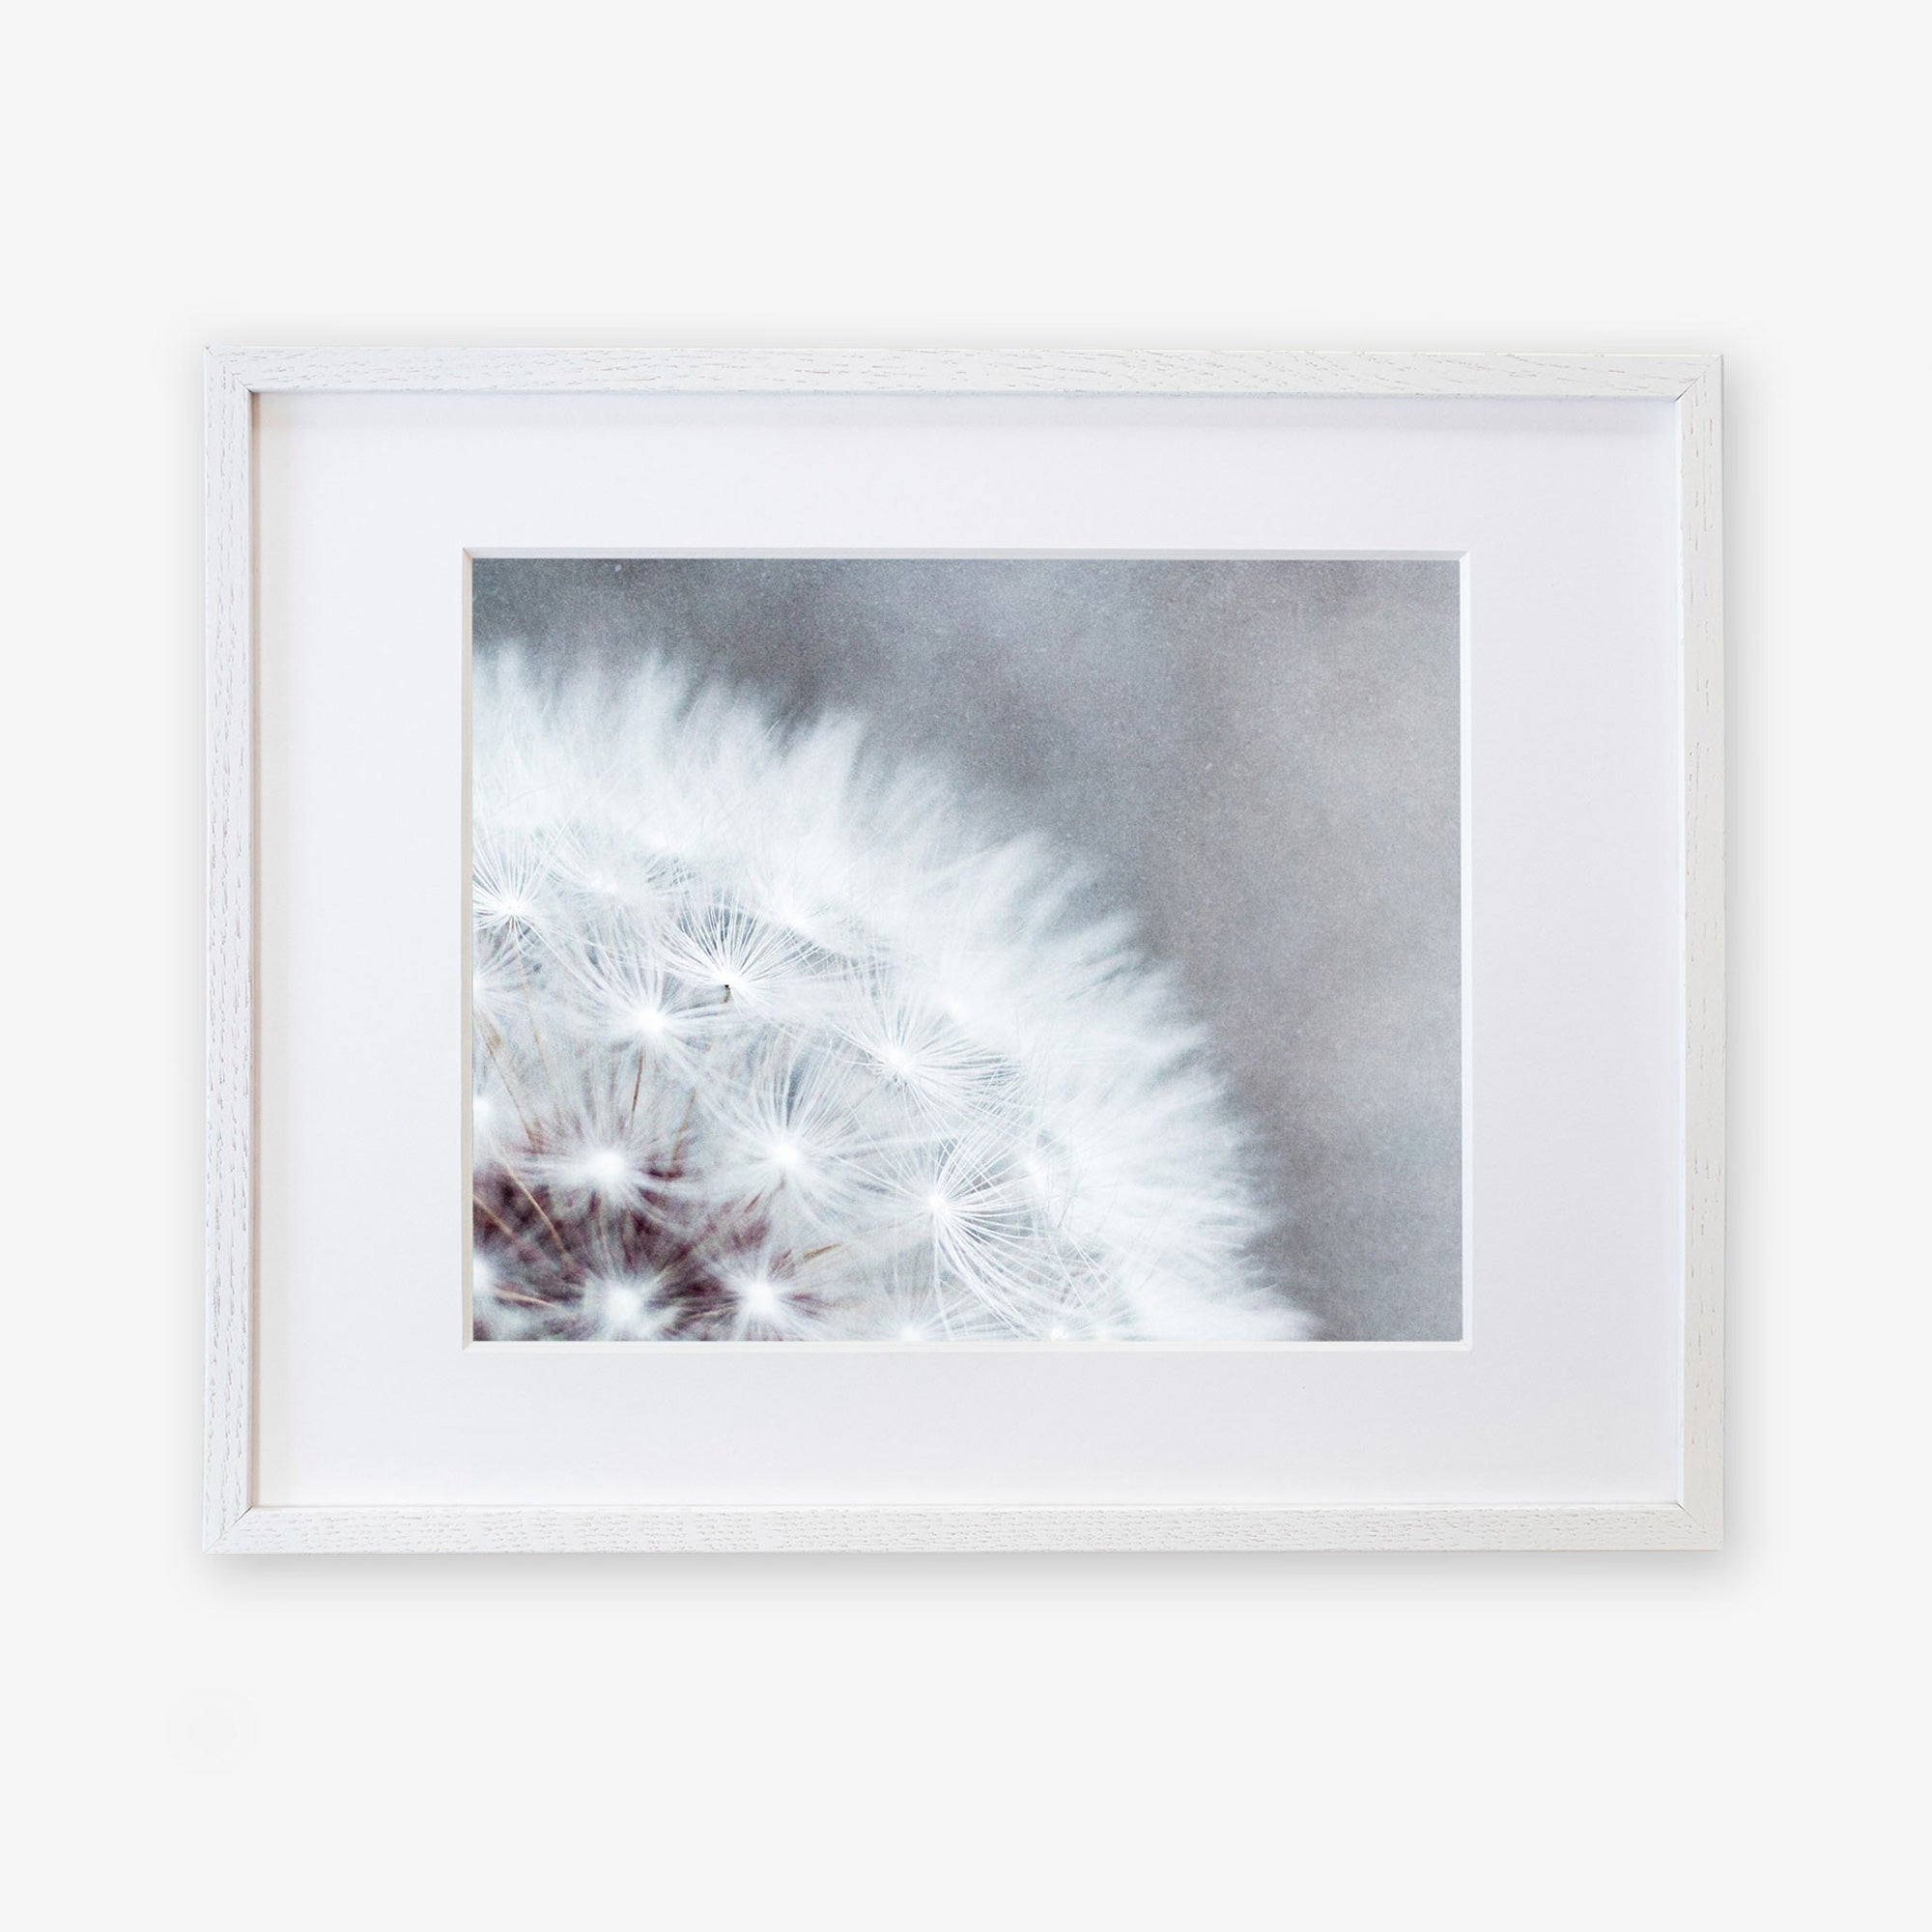 A close-up photograph of a Grey Botanical Print, &#39;Dandelion Queen&#39;, displayed in a white frame against a white background. The seed head is detailed, showing the delicate, feathery seeds by Offley Green.